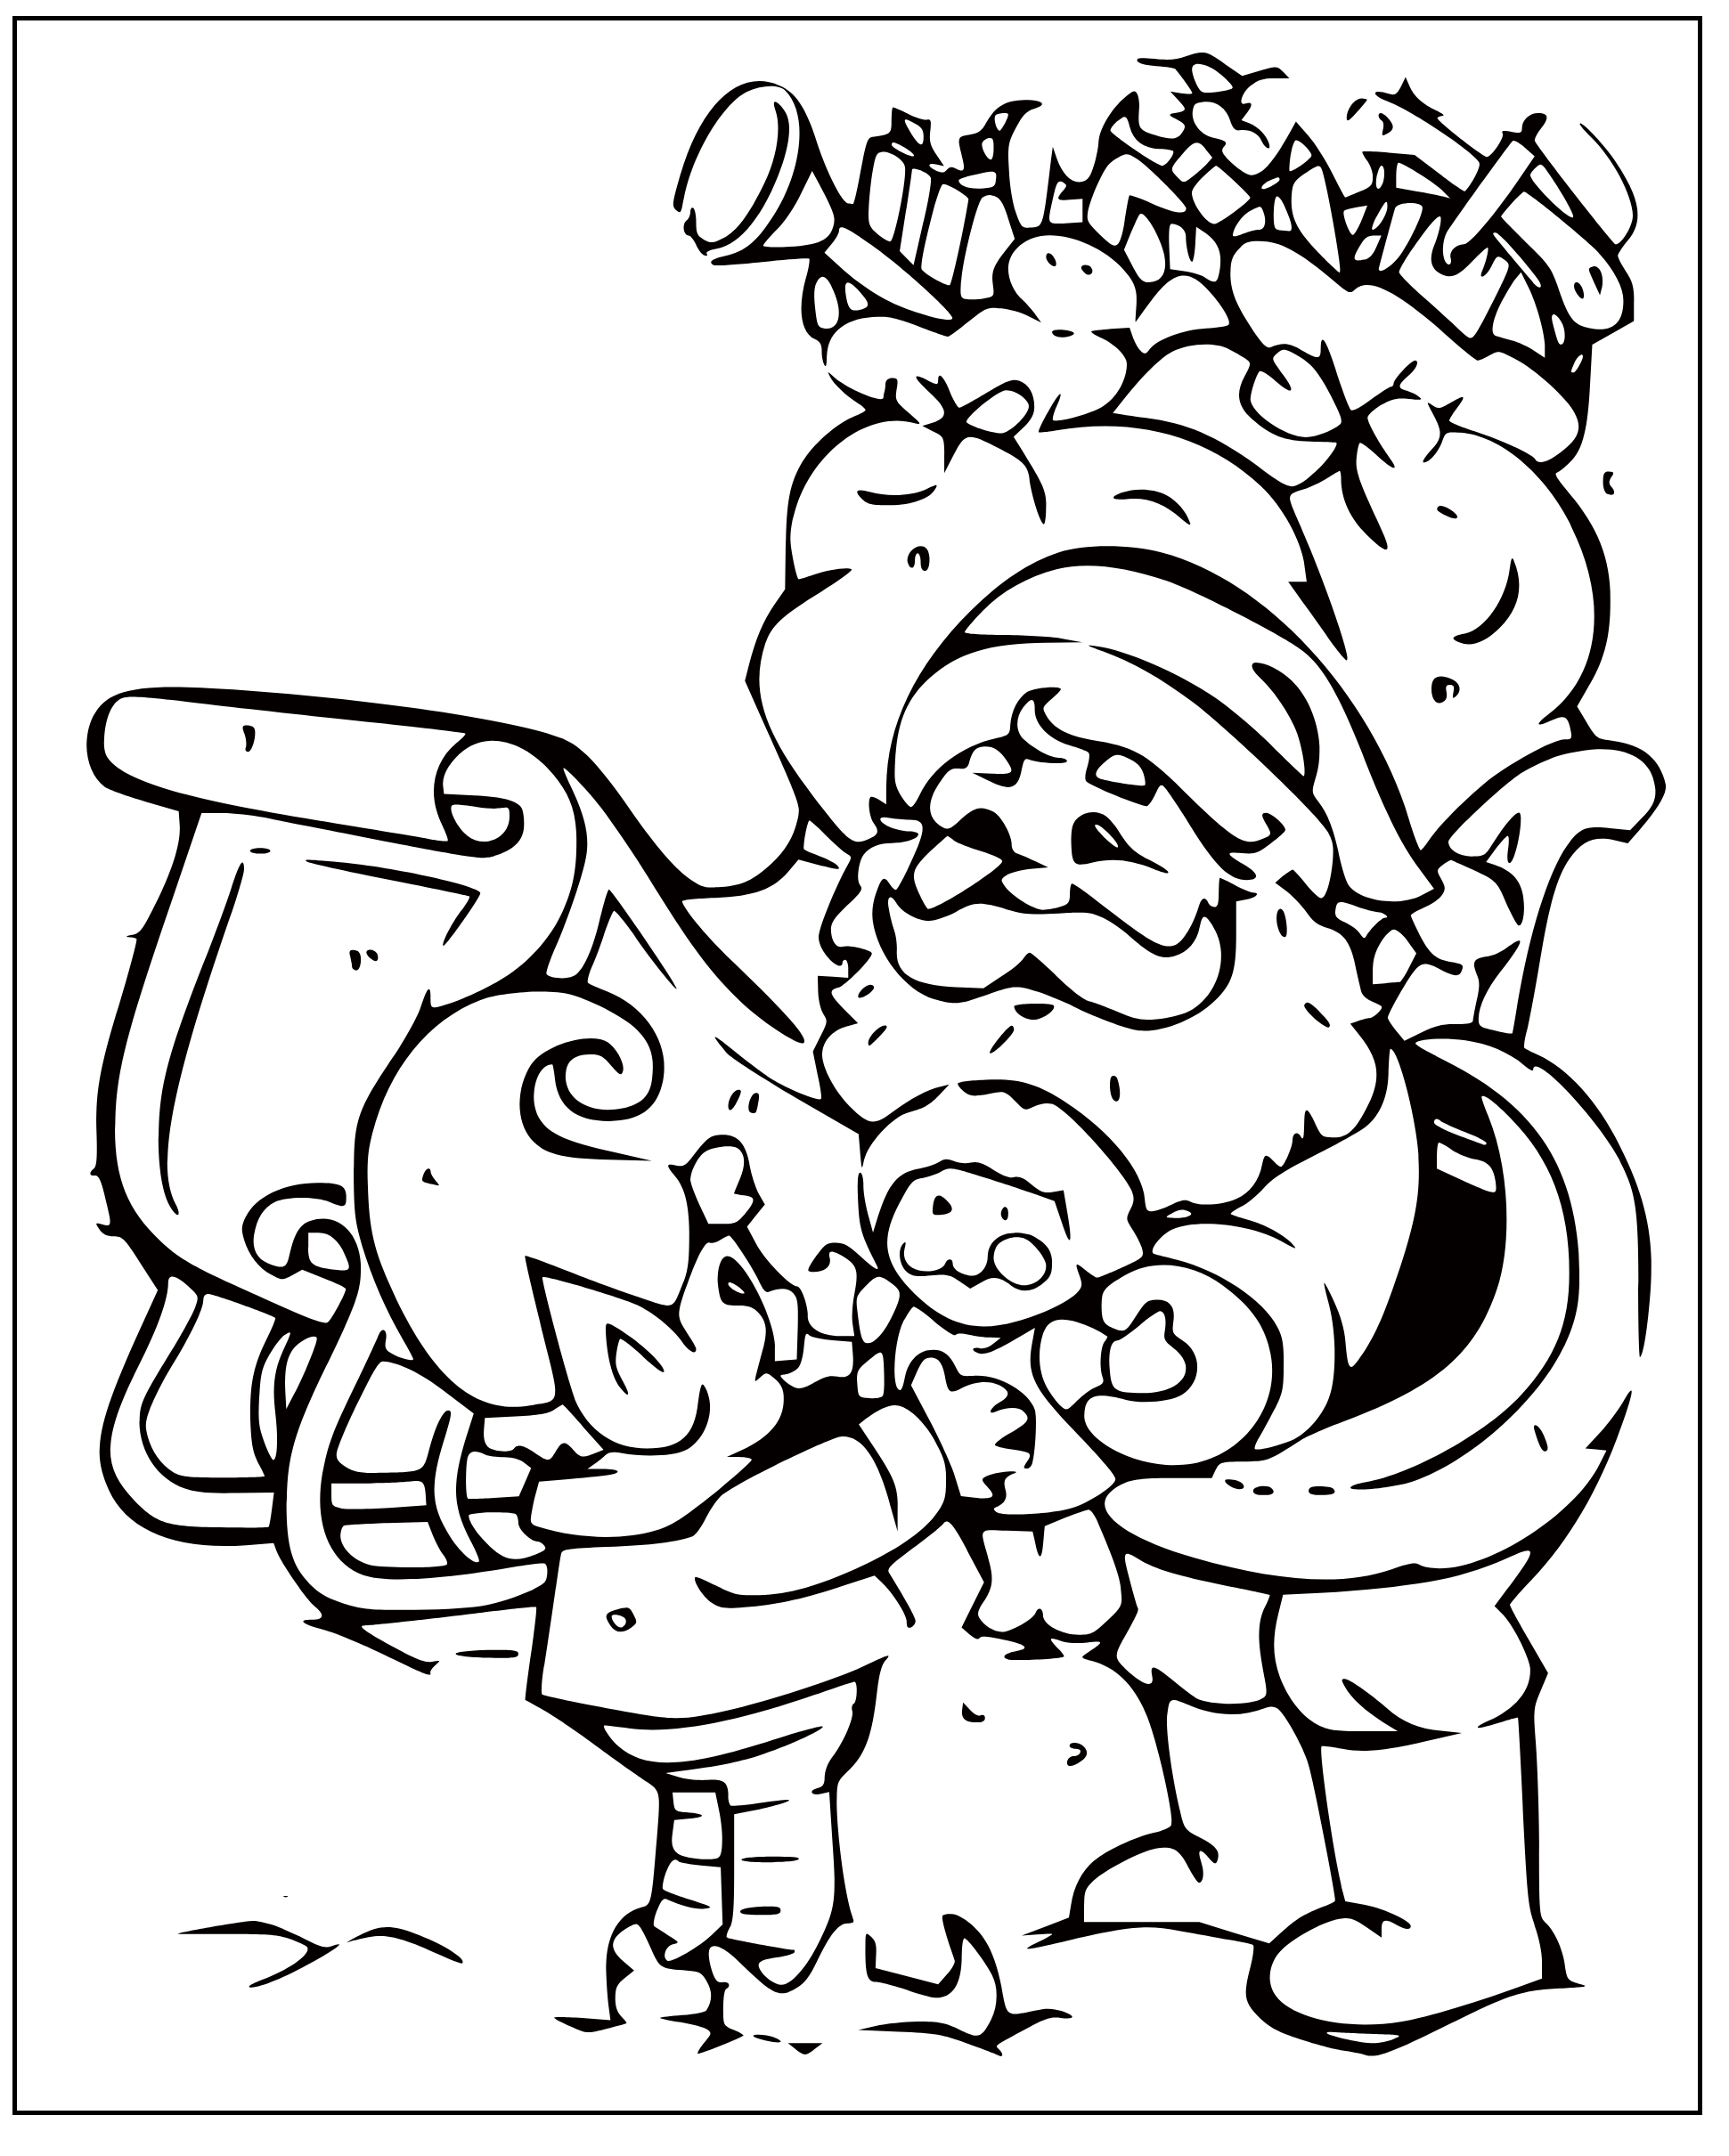 Printable Santa and elf Coloring Page for kids.